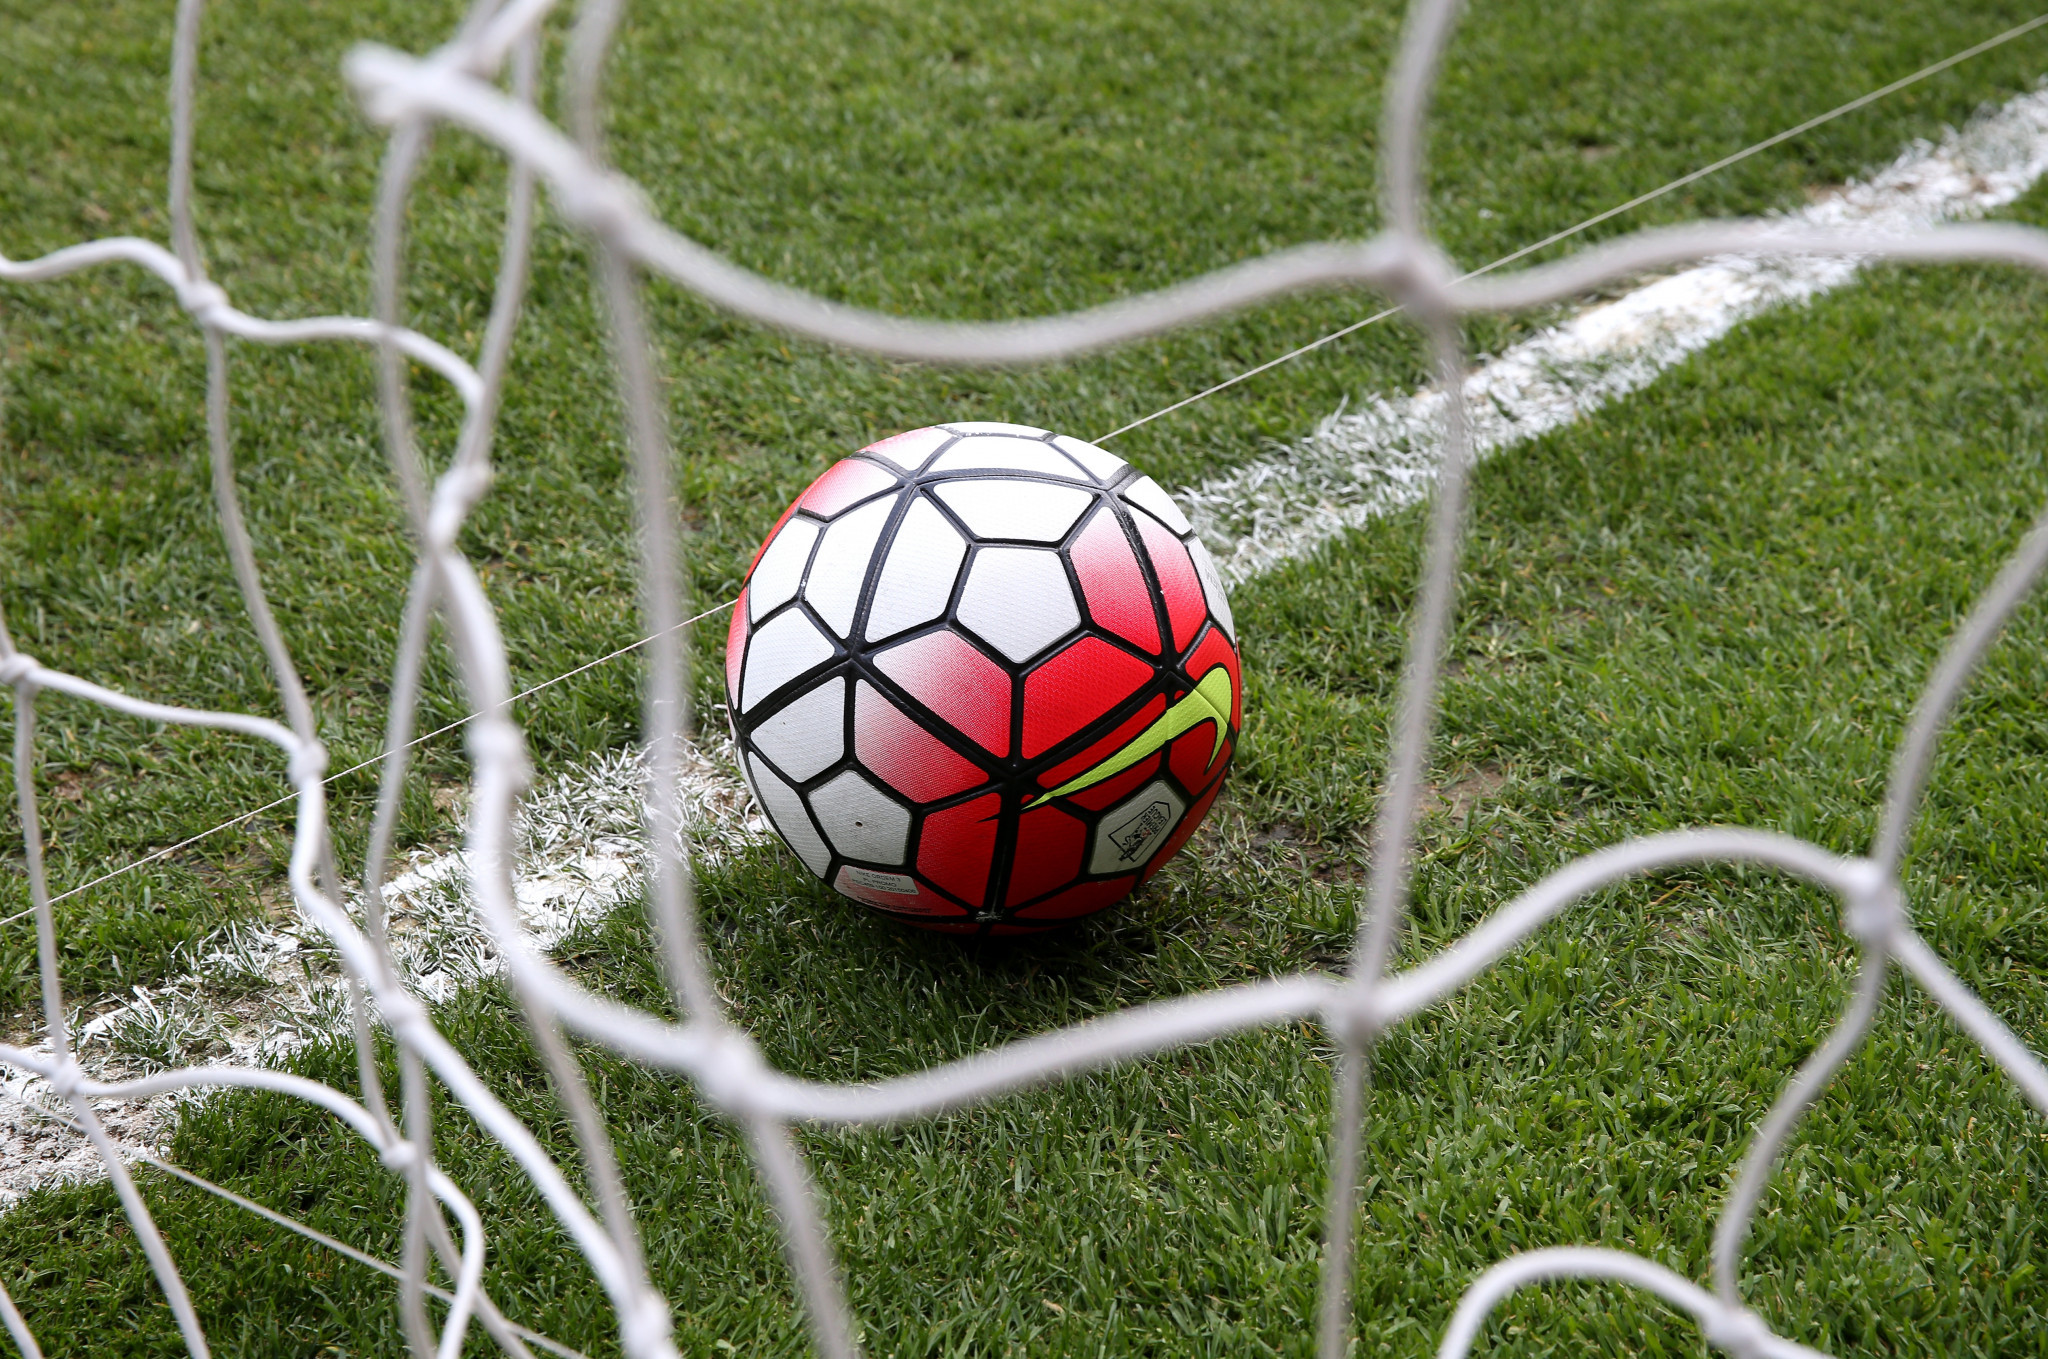 No decision yet on goal-line technology for Tokyo 2020 football tournament